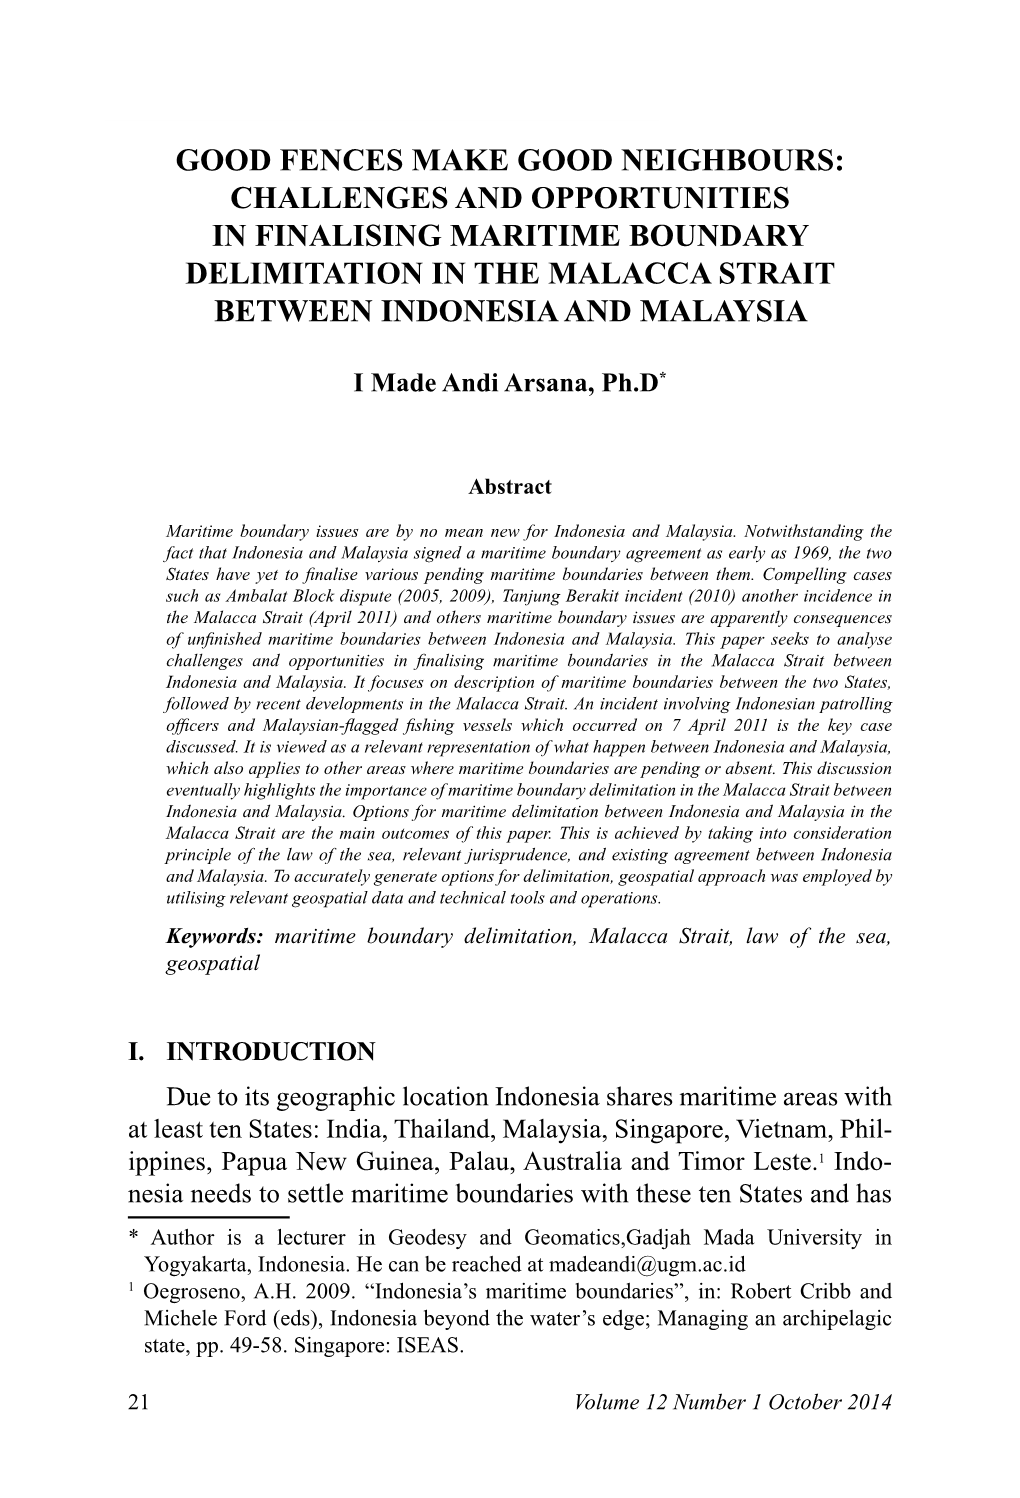 Good Fences Make Good Neighbours: Challenges and Opportunities in Finalising Maritime Boundary Delimitation in the Malacca Strait Between Indonesia and Malaysia